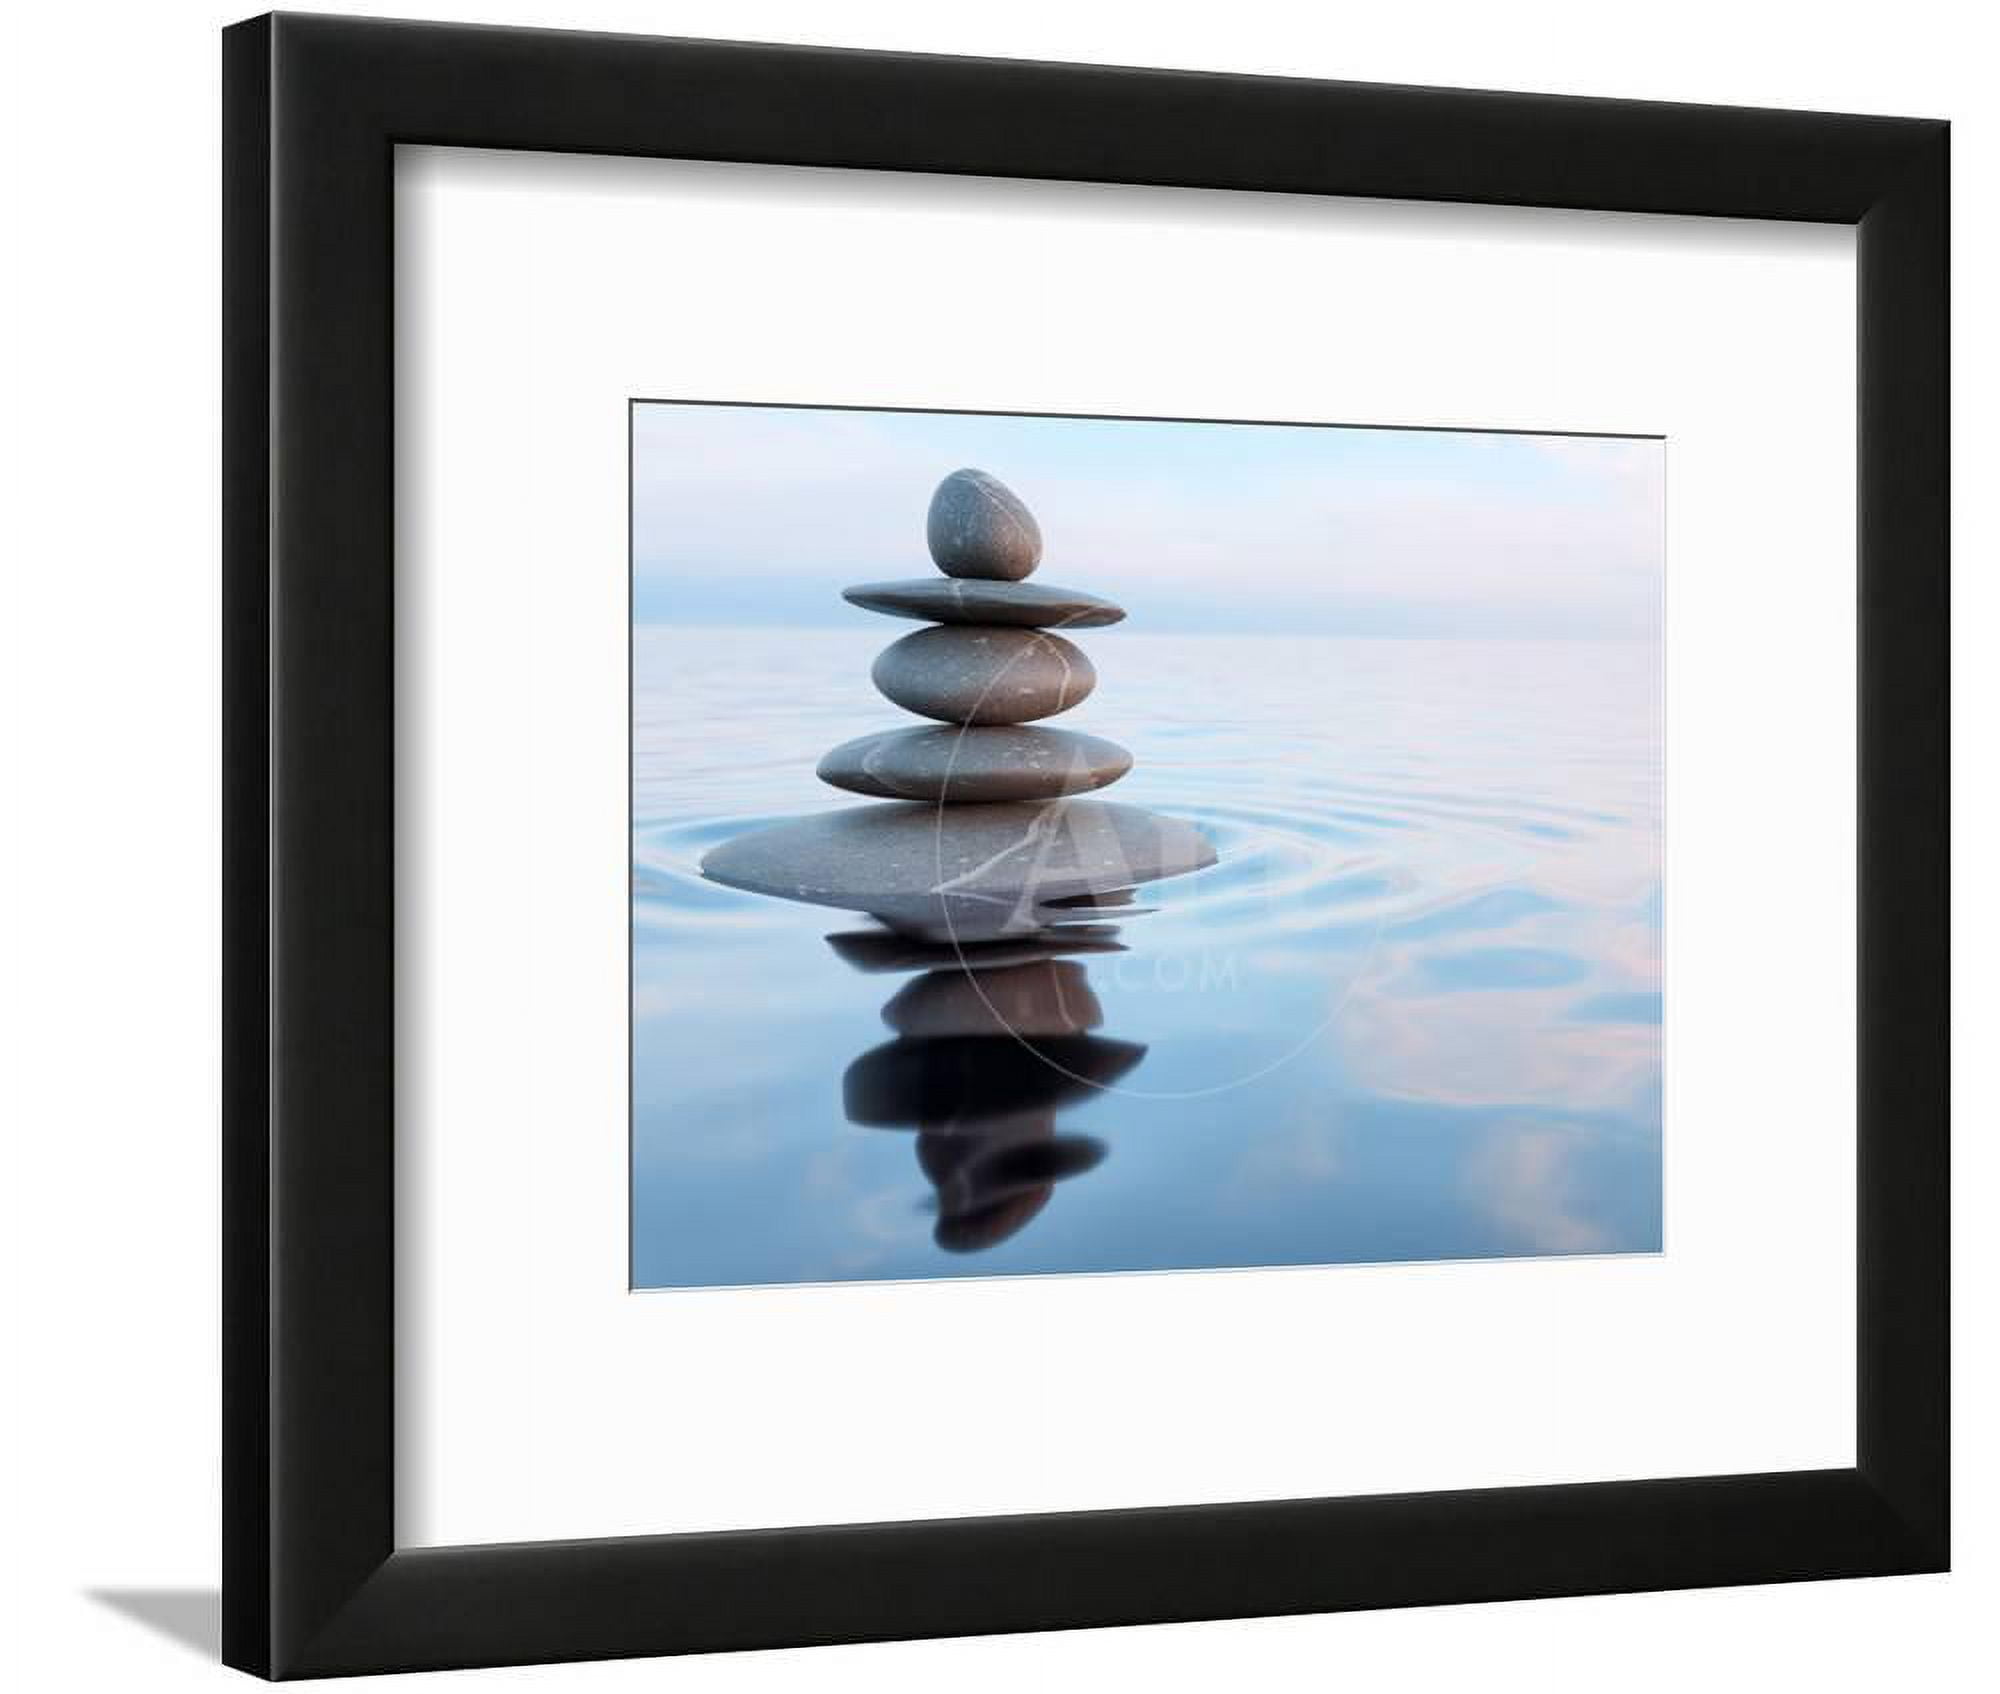 3D Rendering of Zen Stones in Water with Reflection - Peace Balance  Meditation Relaxation Concept' Photographic Print - f9photos